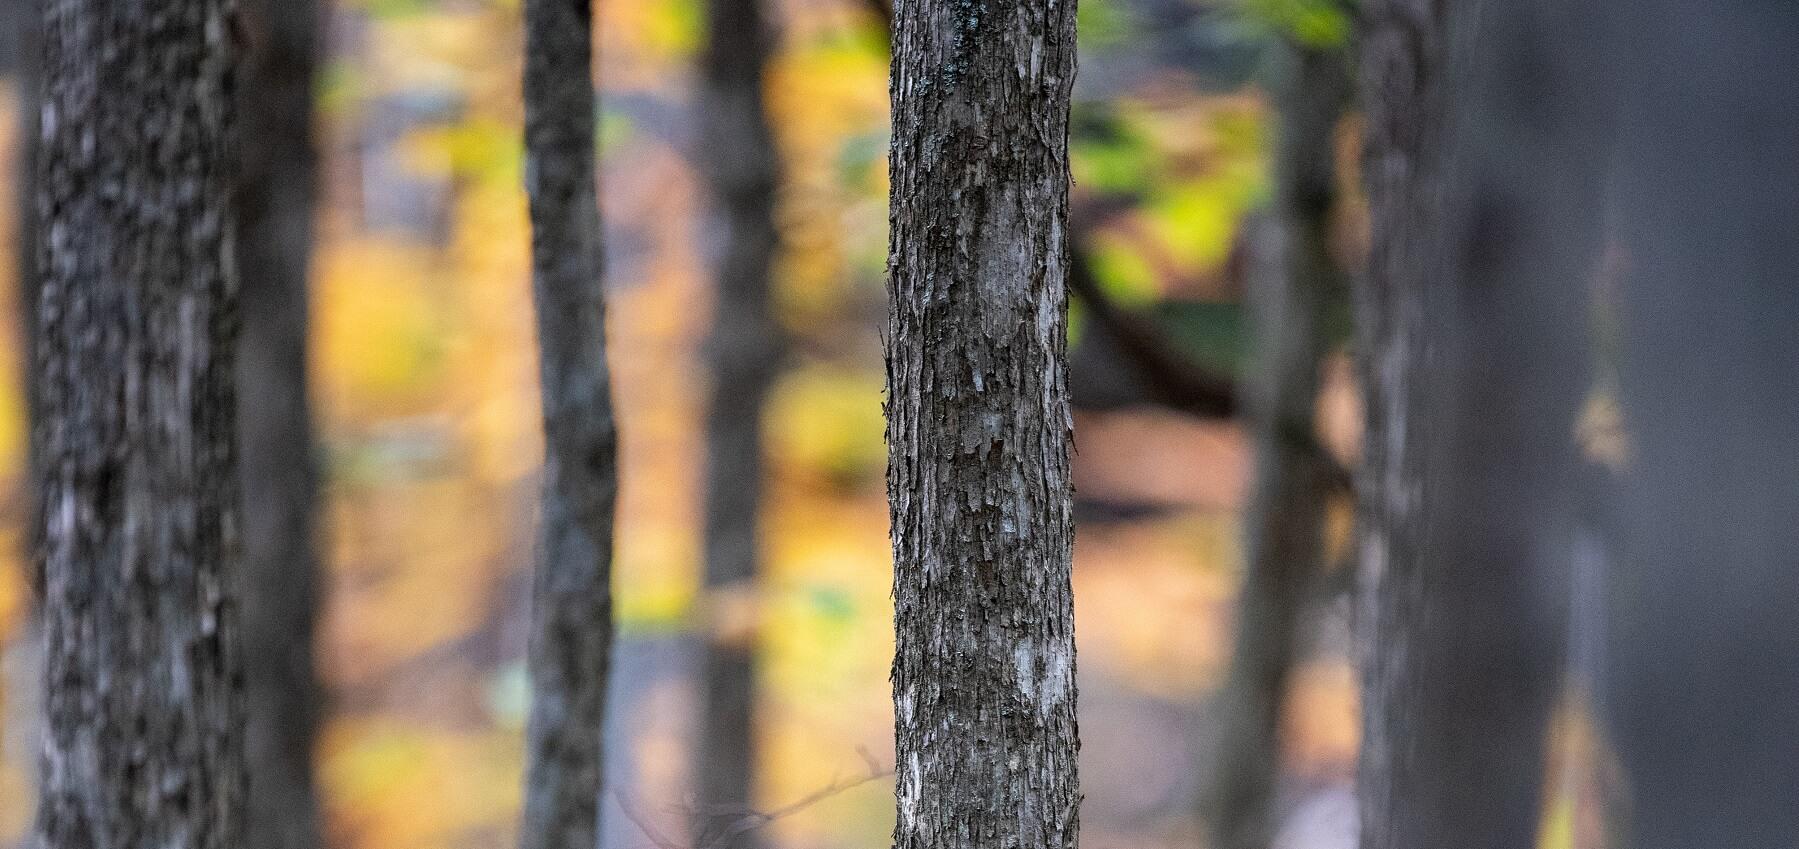 A close up view of bark on trees in a forest